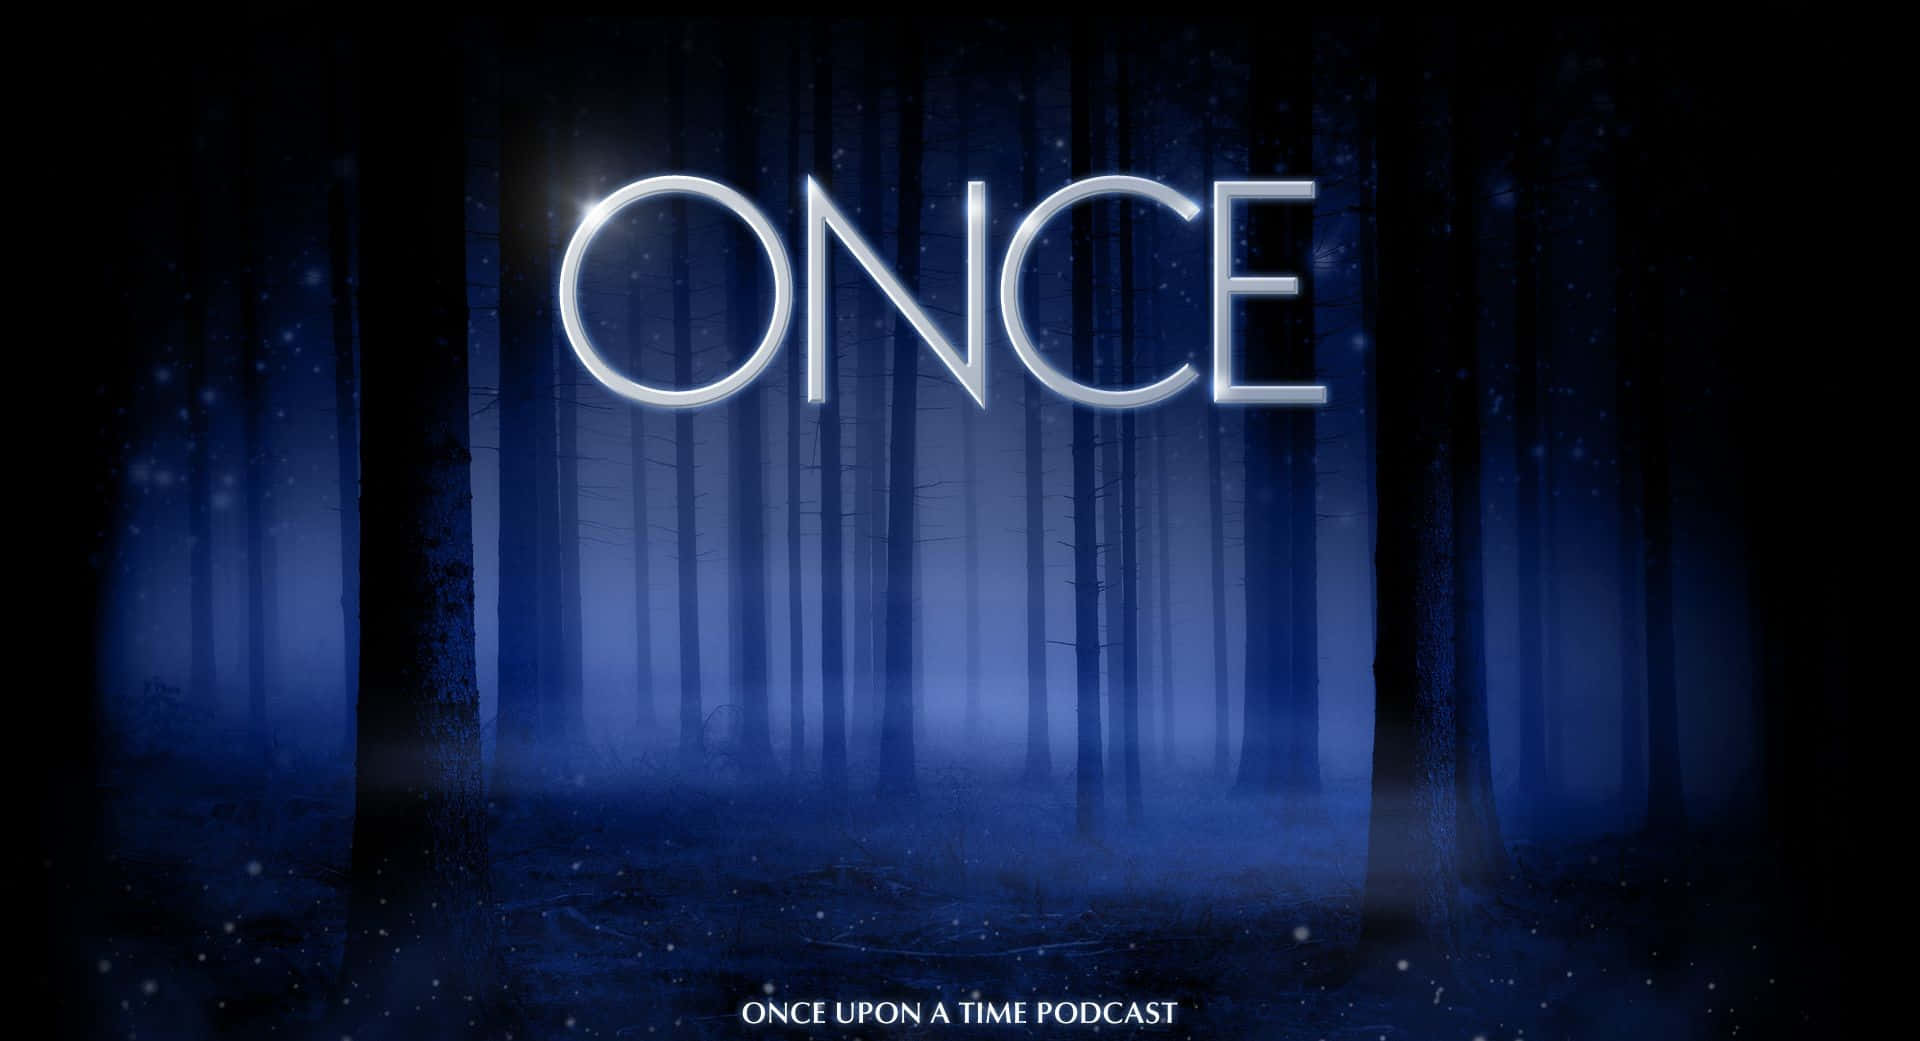 "Dreams do come true with Once Upon A Time"